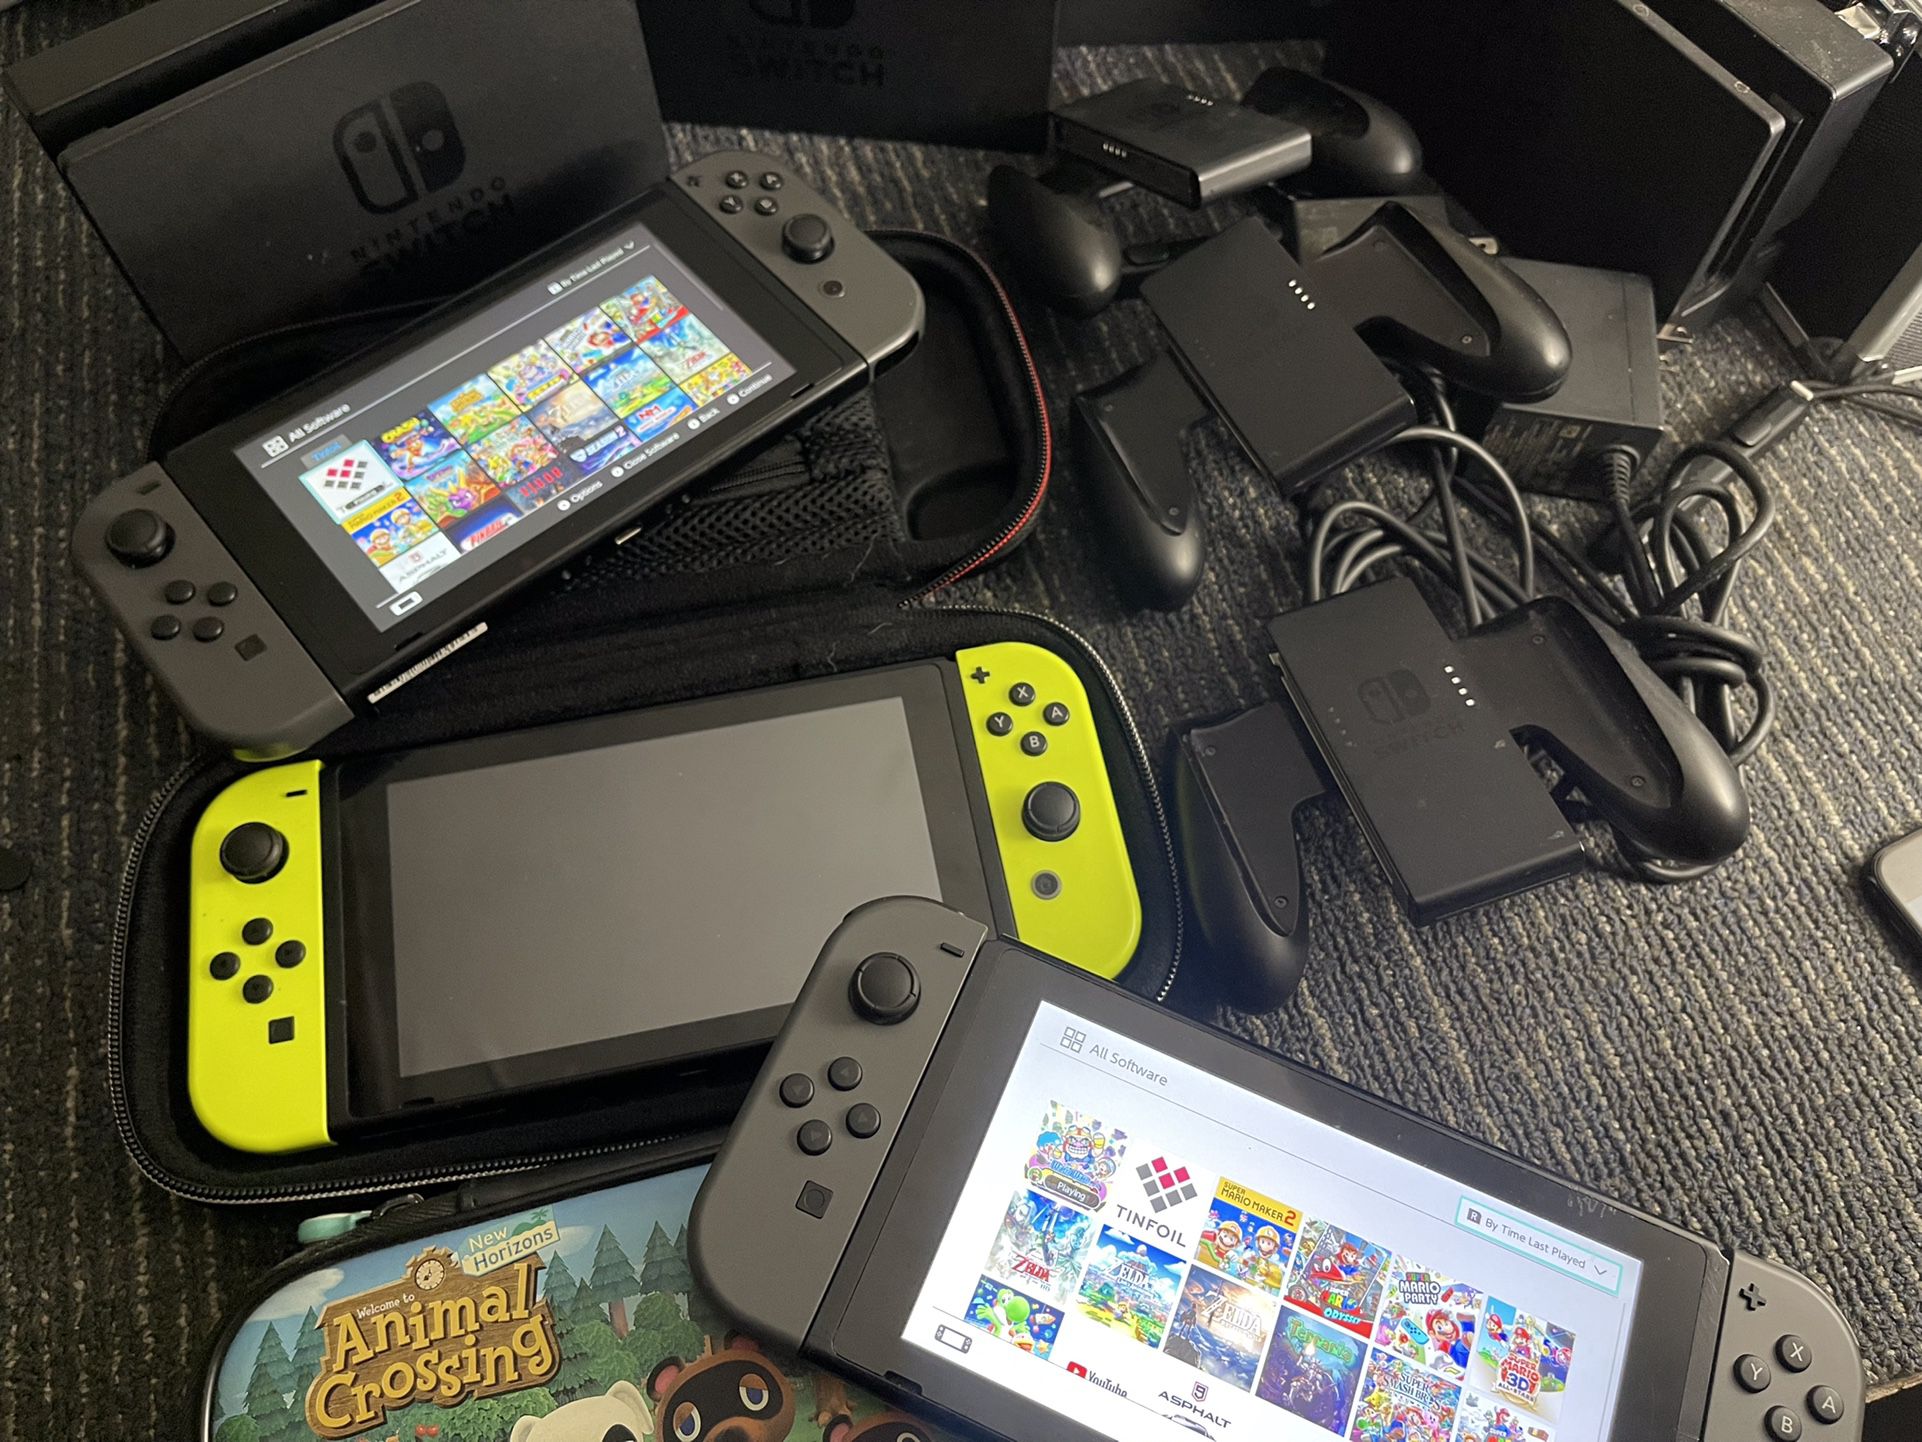 Nintendo Switch With 100 Games And Free Games ( Ask How To Get Free Games On Urs